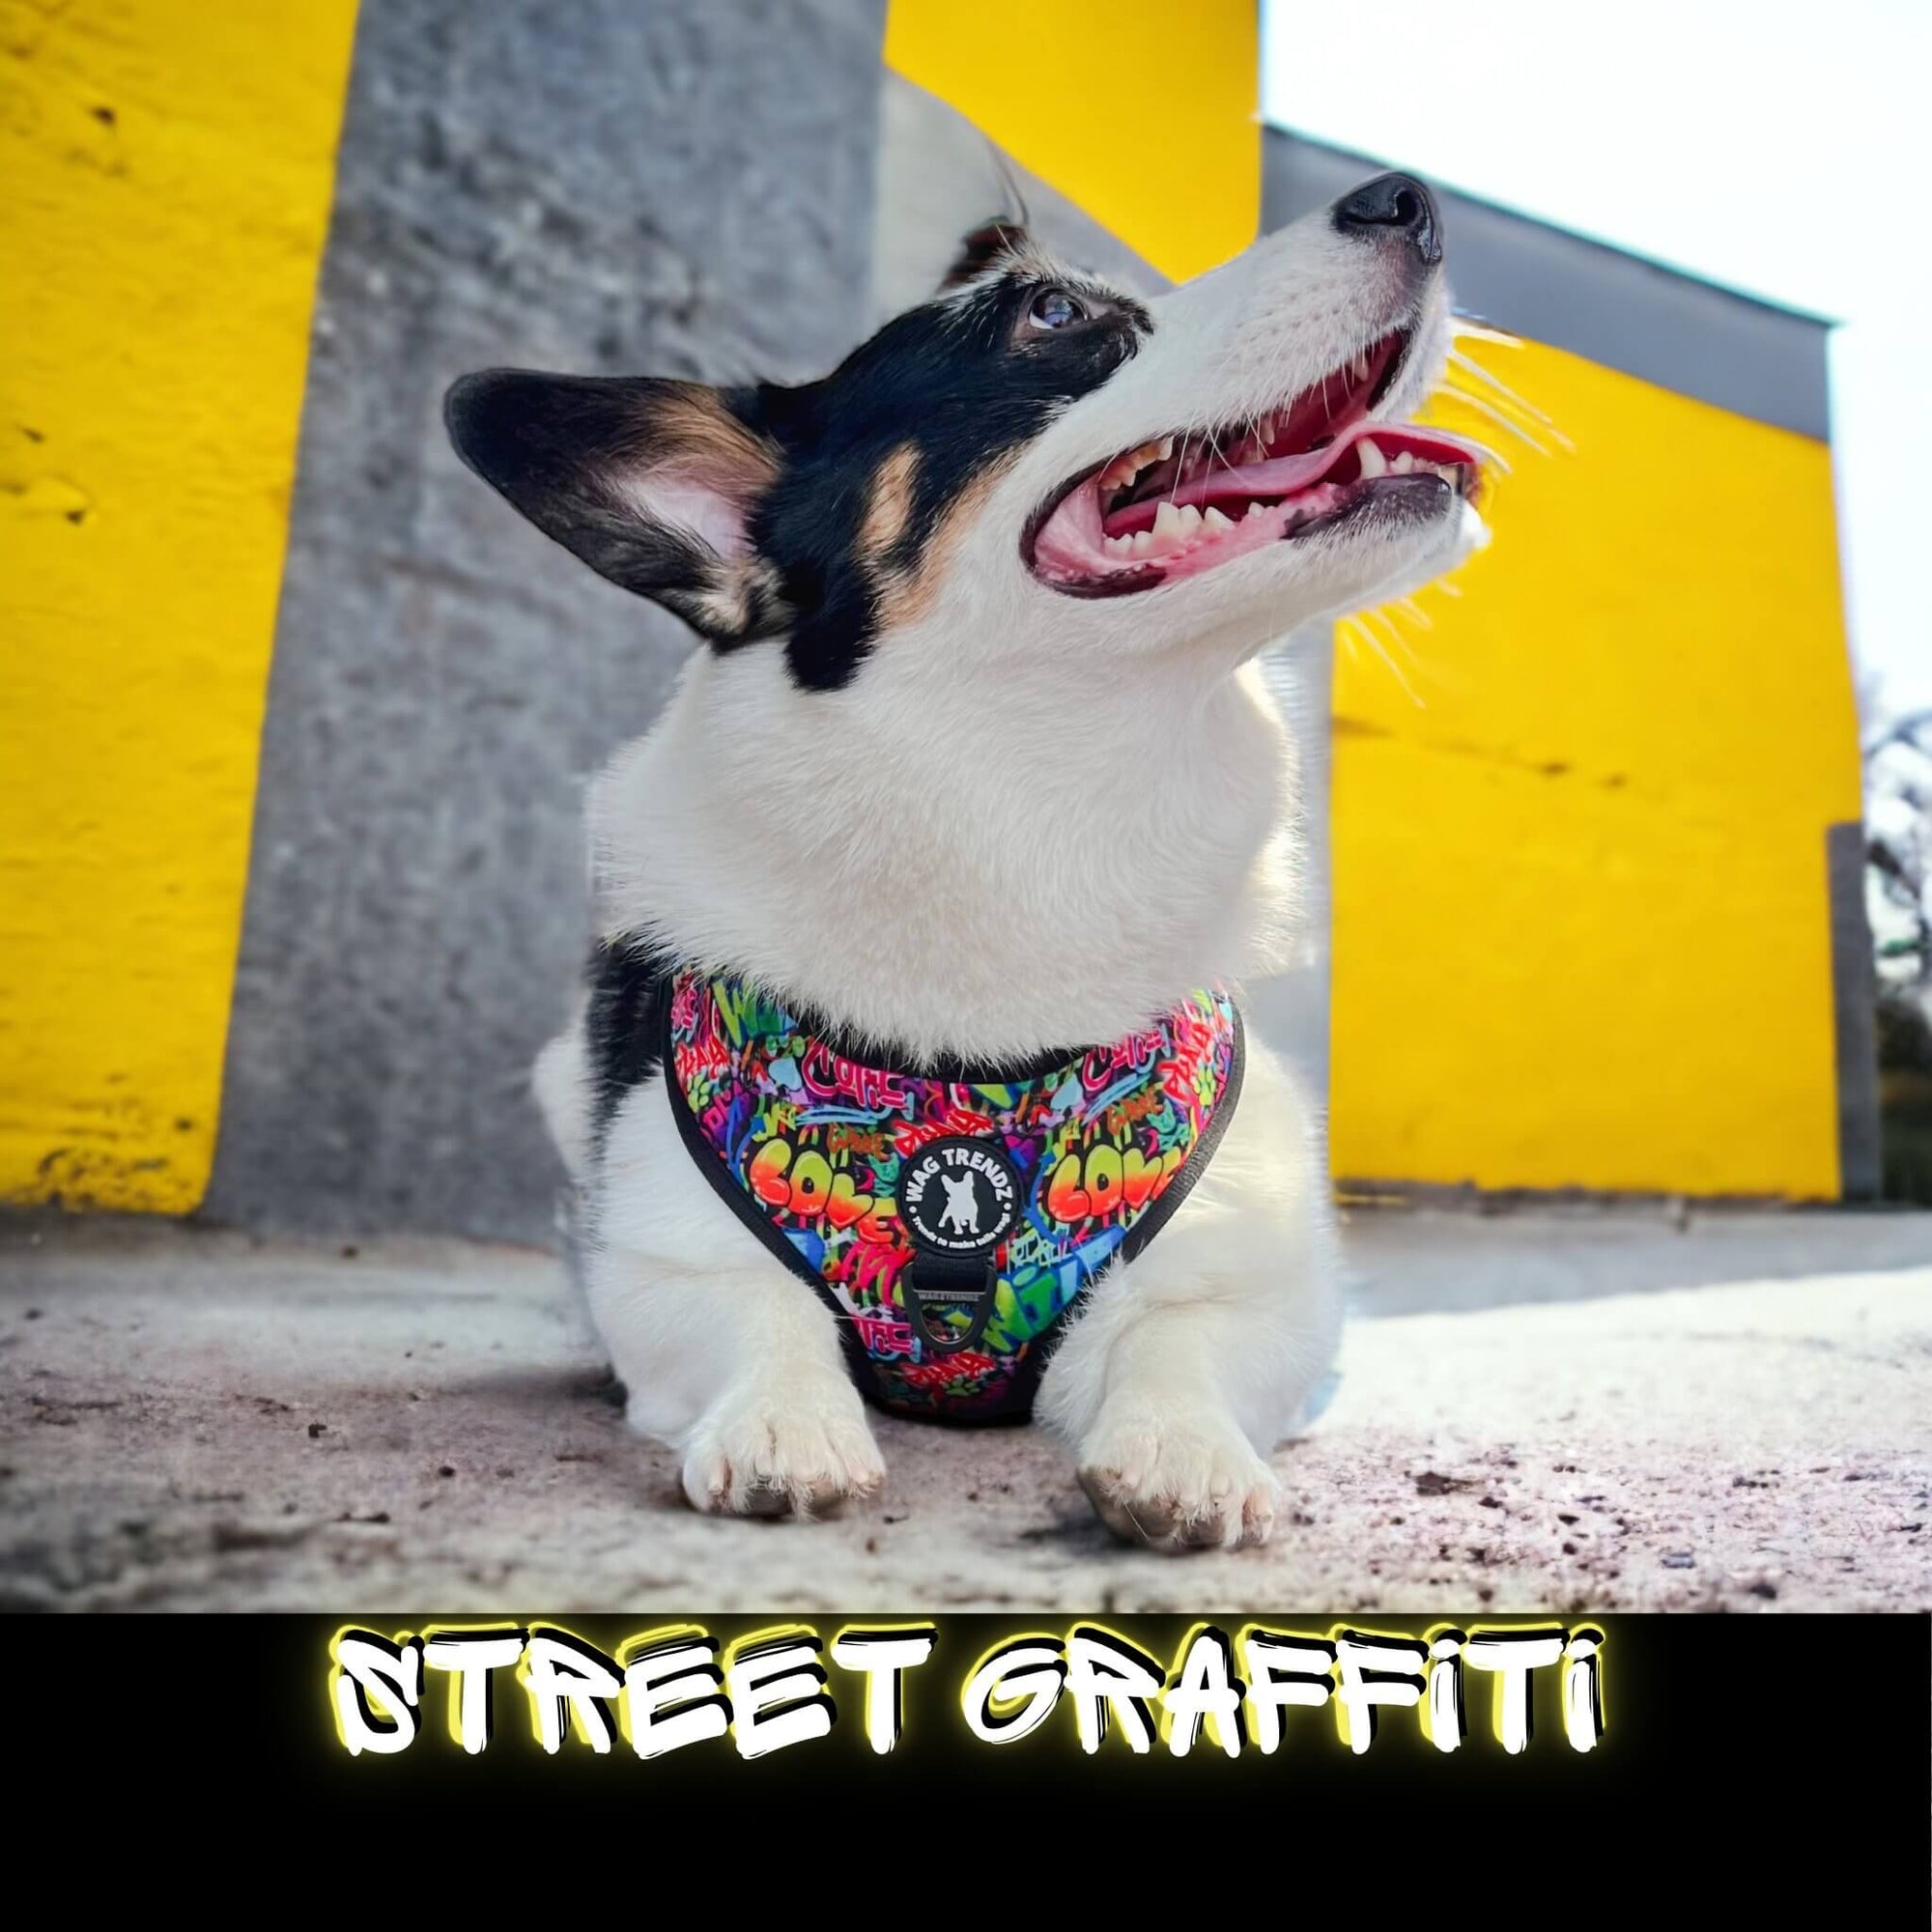 No Pull Dog Harness in Street Graffiti worn by Corgi laying down in front of graffiti yellow concrete wall